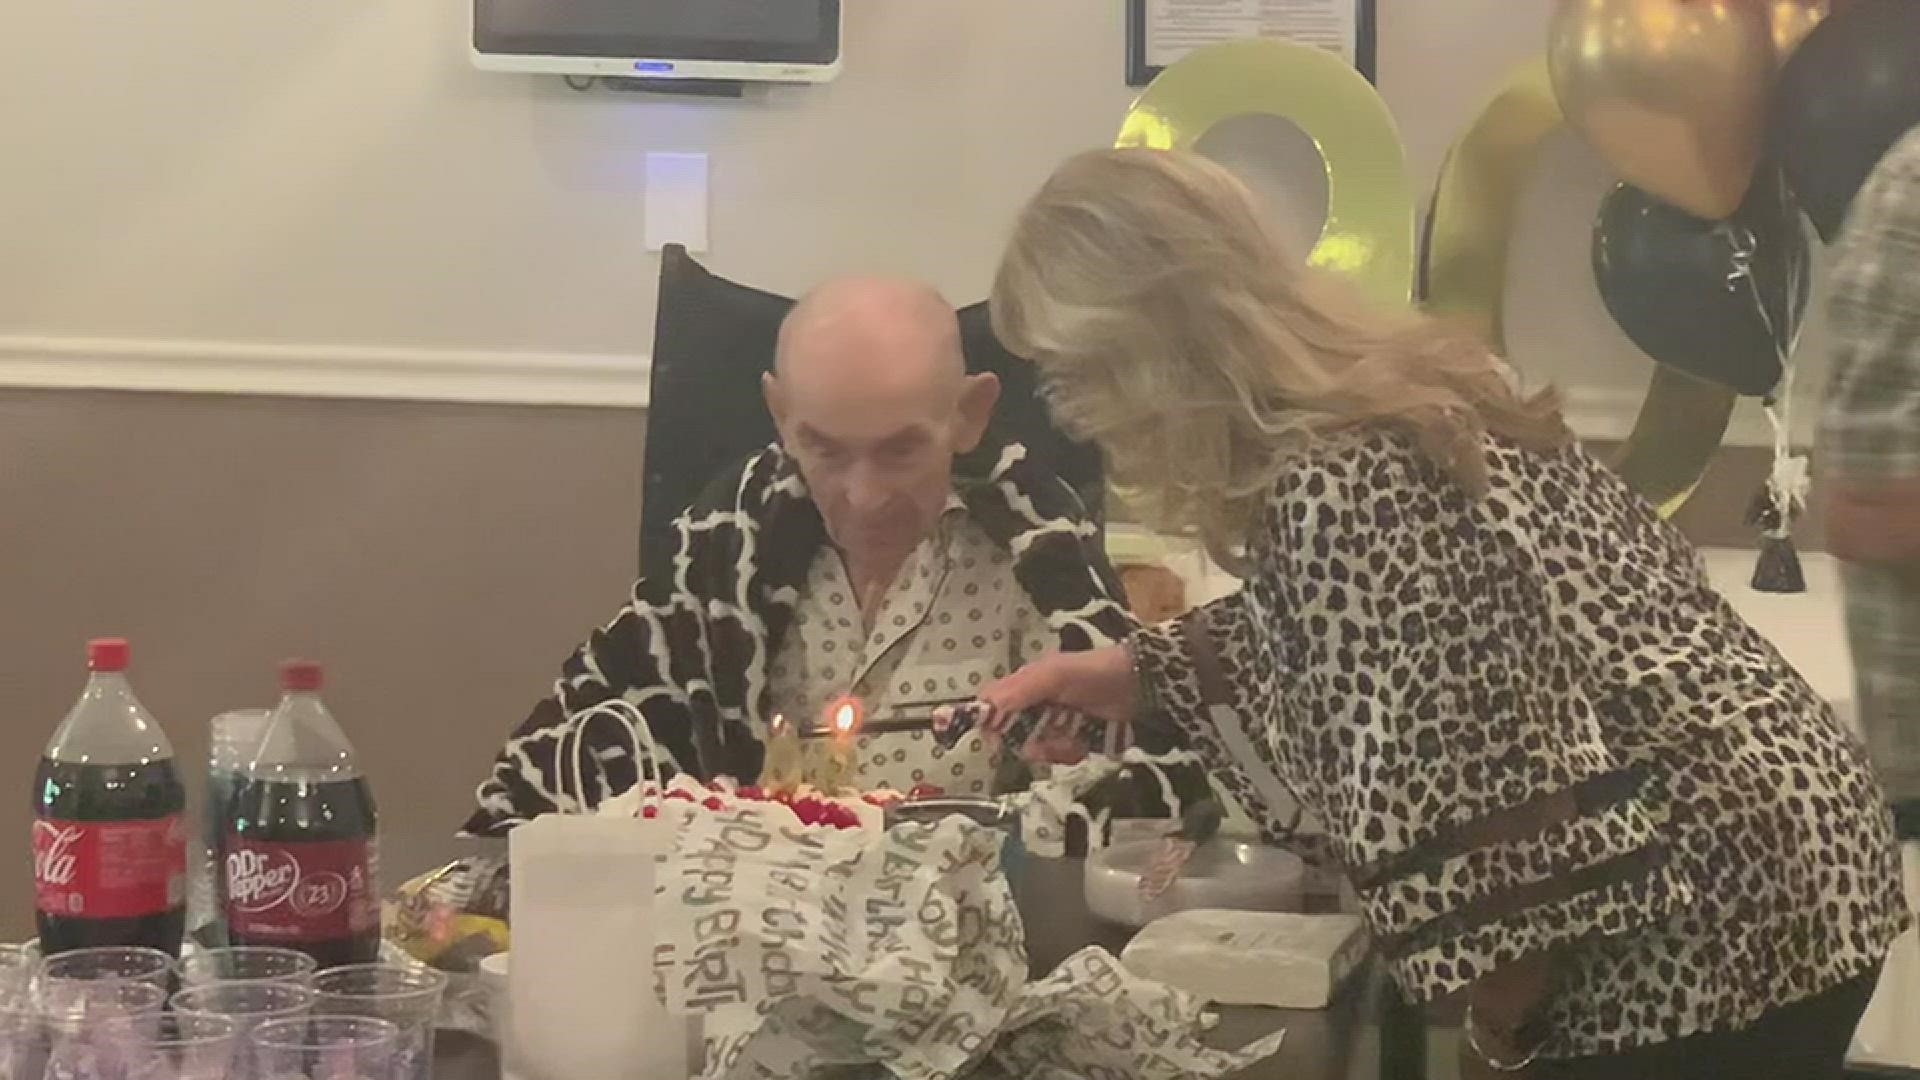 John Ardoin was recently diagnosed with pneumonia and lung cancer, but that didn't stop his family from showing up to sing him 'Happy Birthday.'